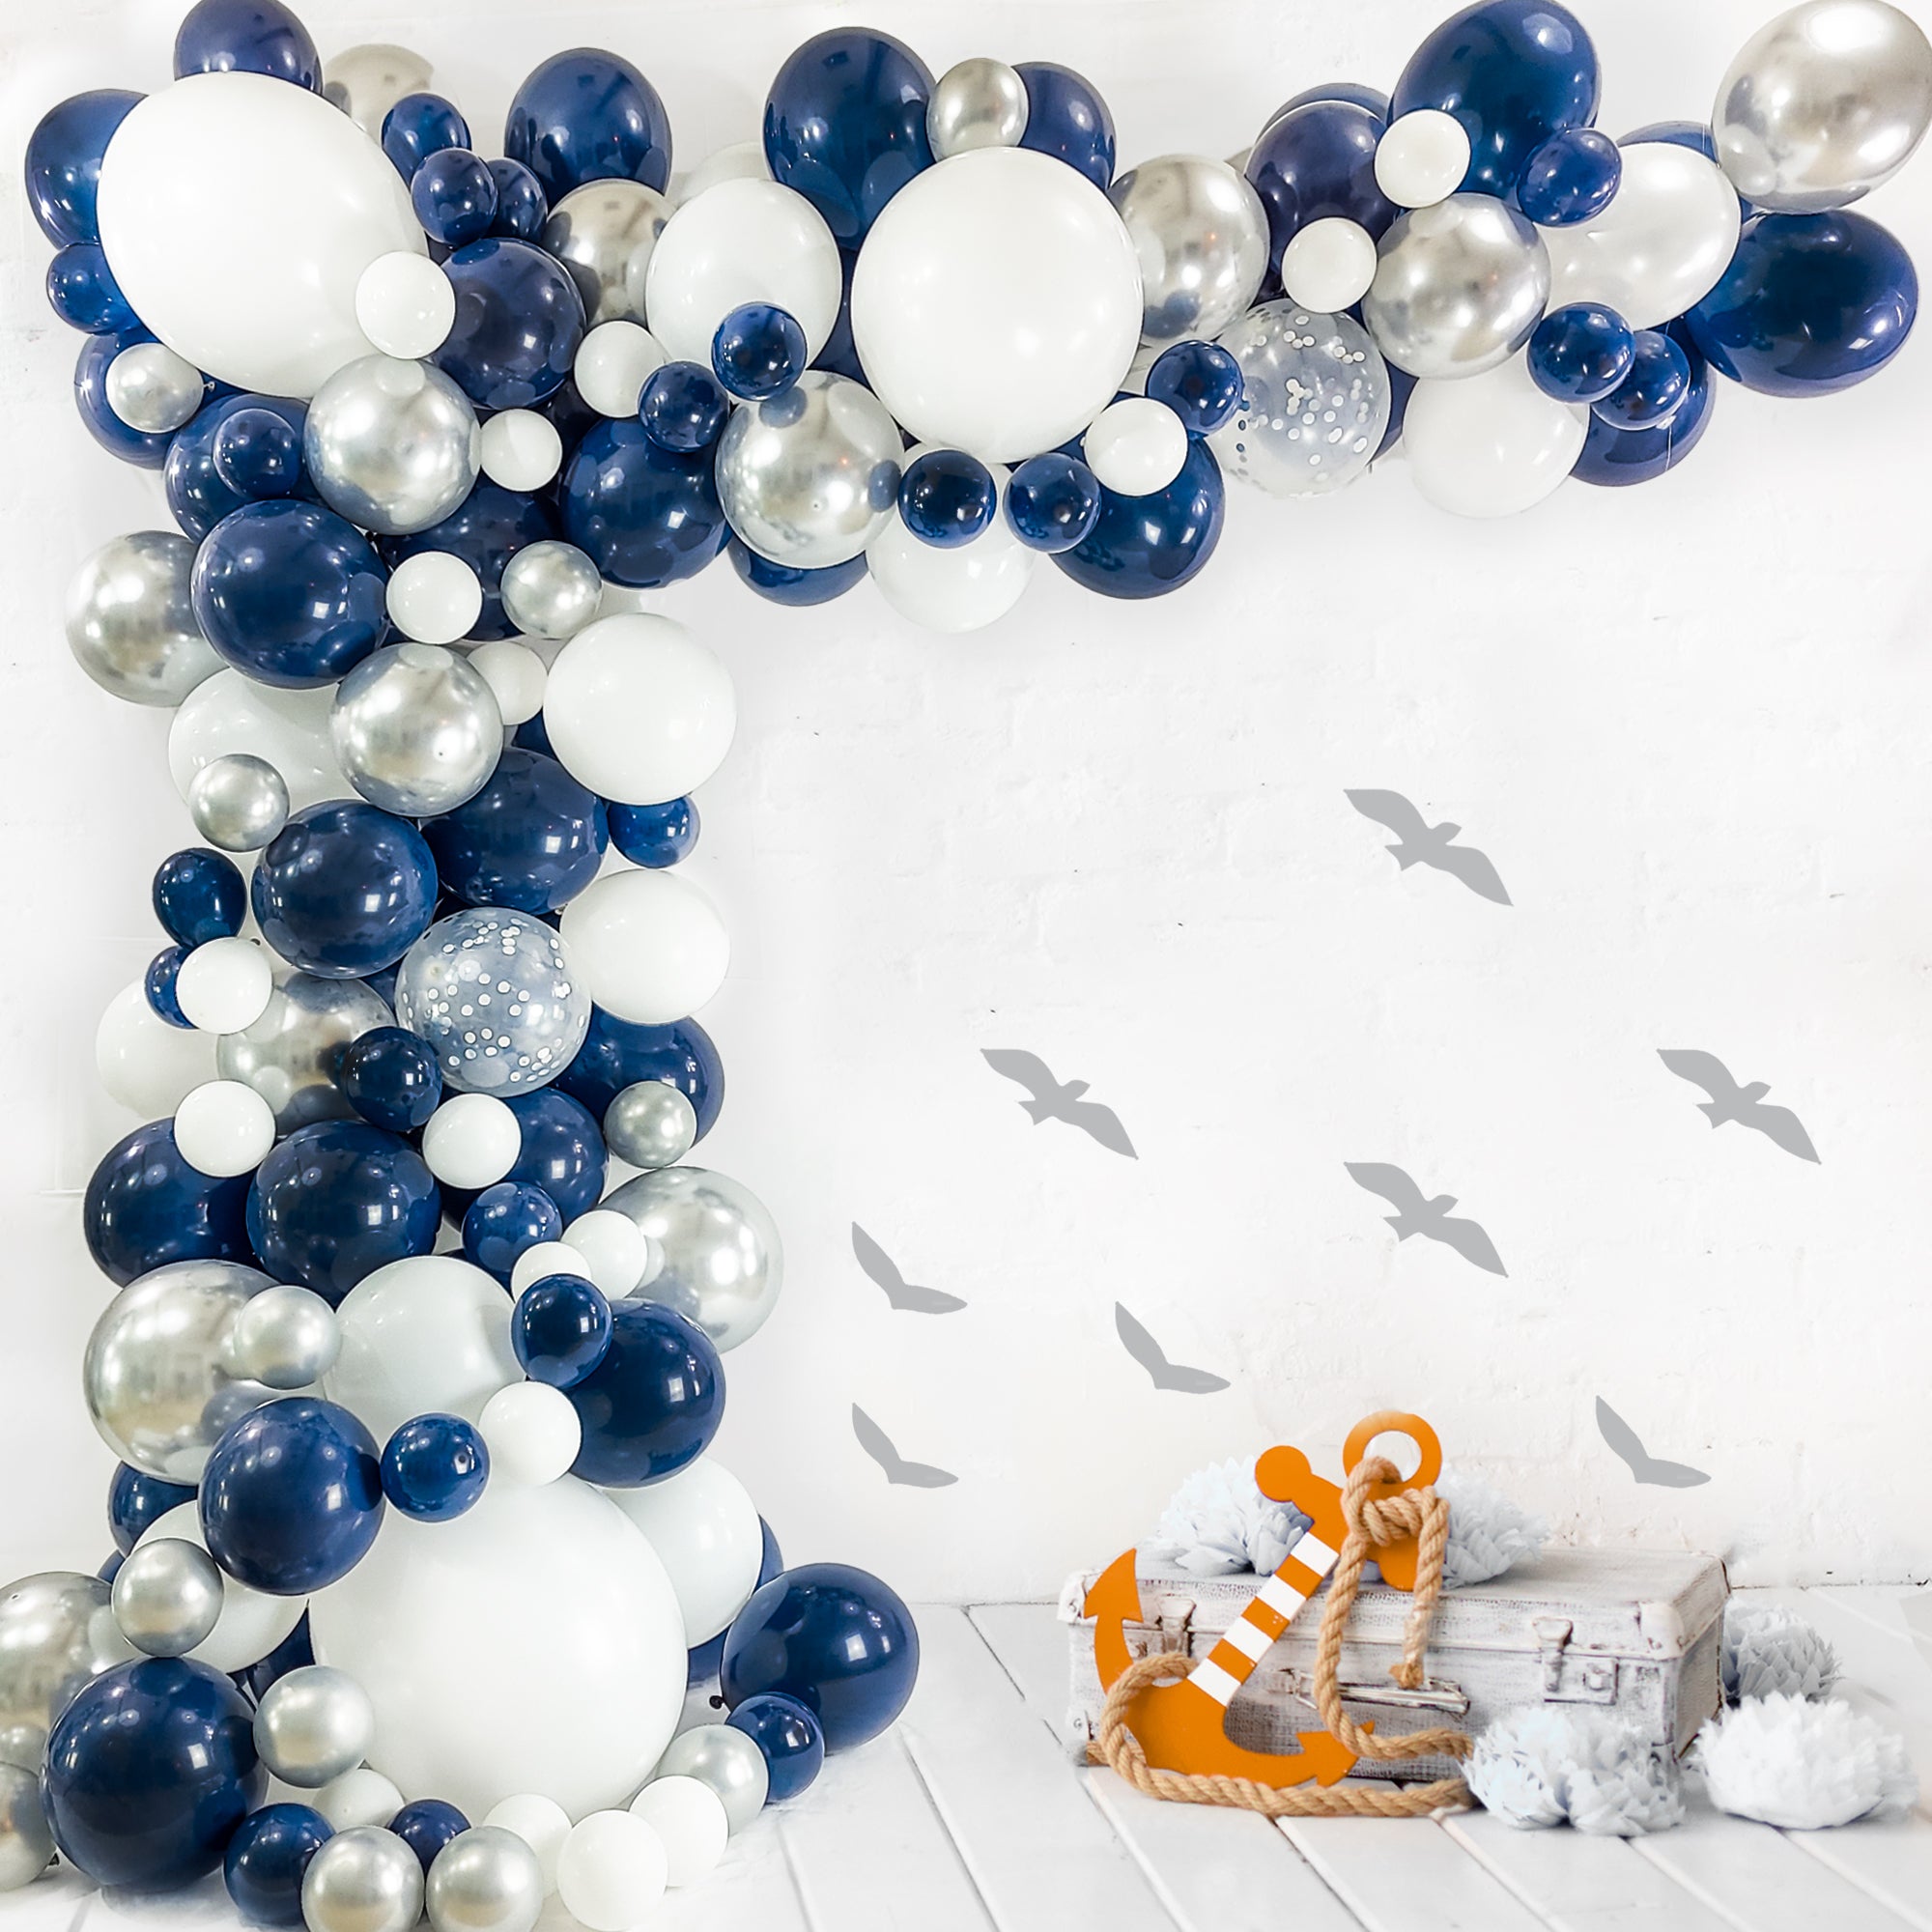 Nautical Balloon Garland Kit Navy Blue Red Confetti Balloons for